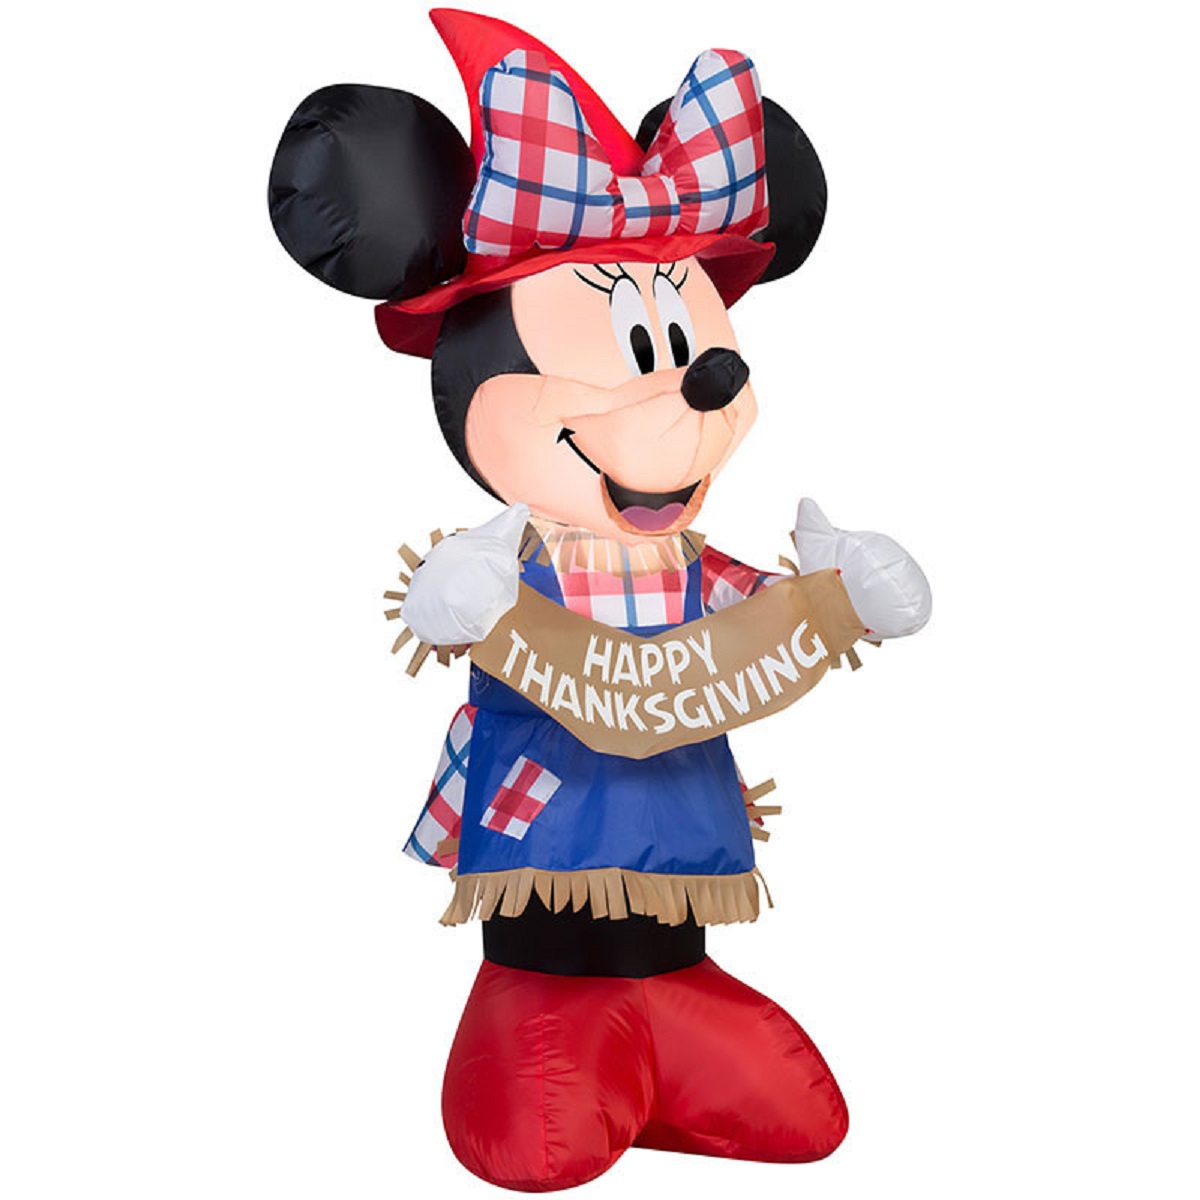 Minnie Mouse Scarecrow Airblown Inflatable Thanksgiving Yard Art Lawn Decoration - image 1 of 2